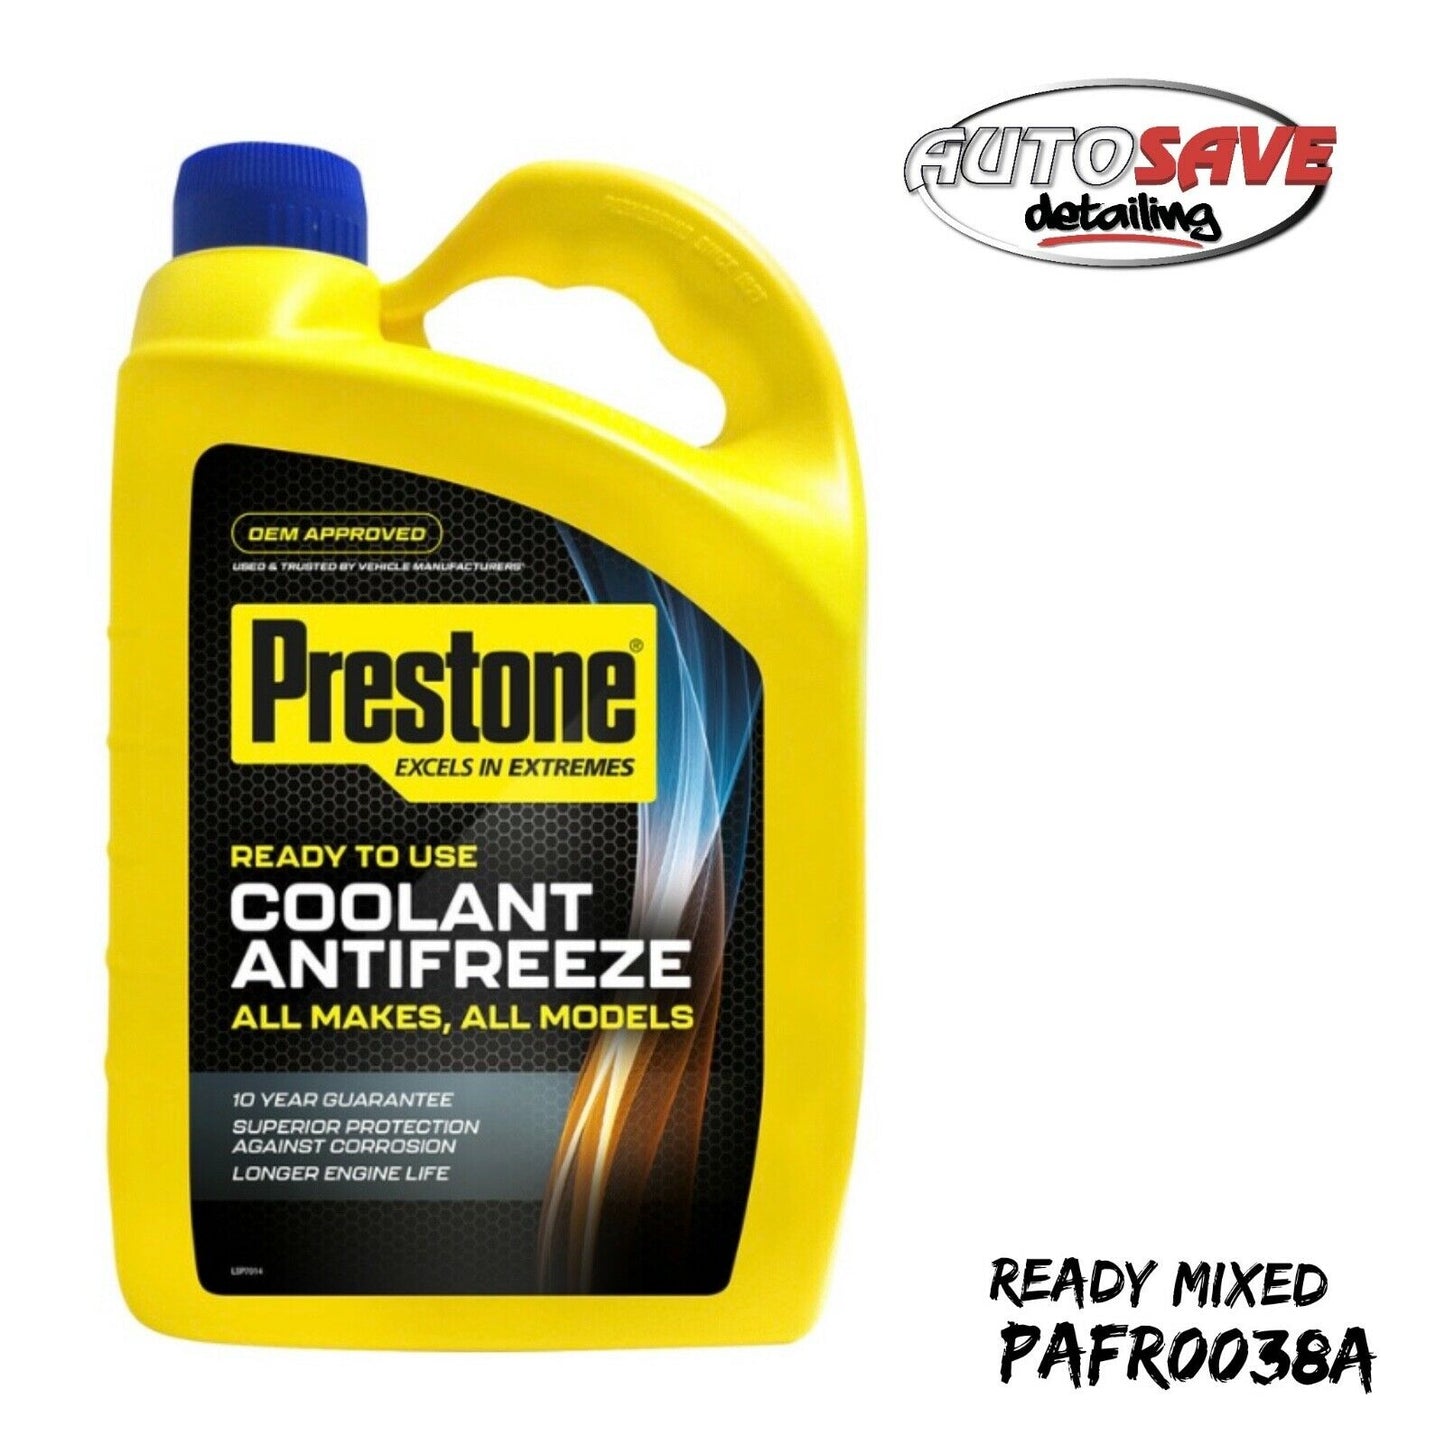 Prestone Antifreeze Ready to Use Mixed Summer Winter Engine Coolant 4 Litre